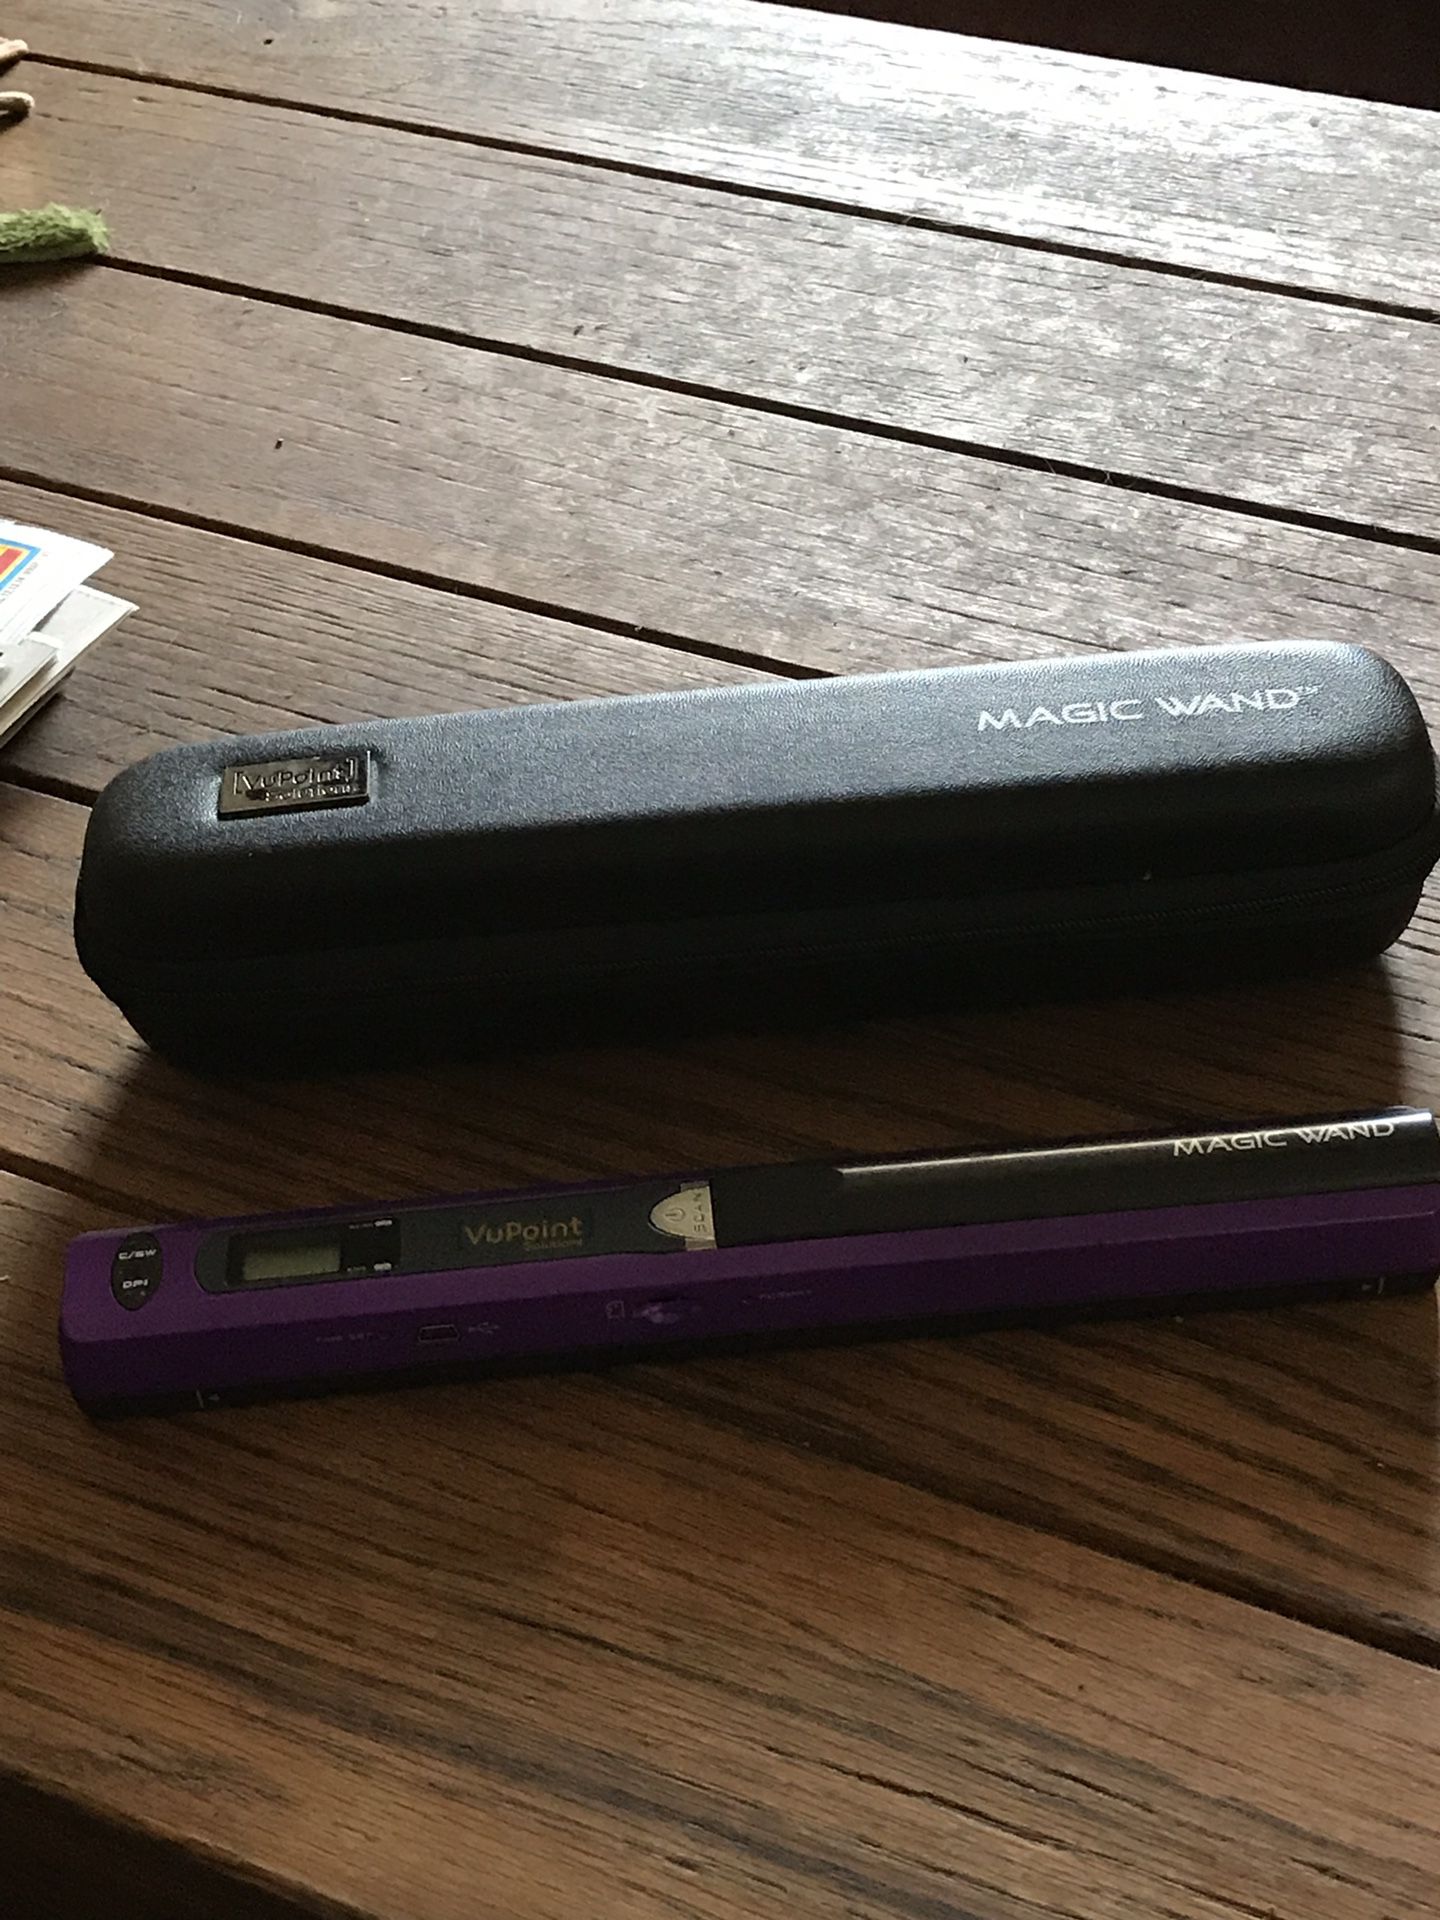 Portable scanner Magic wand VuPoint with case